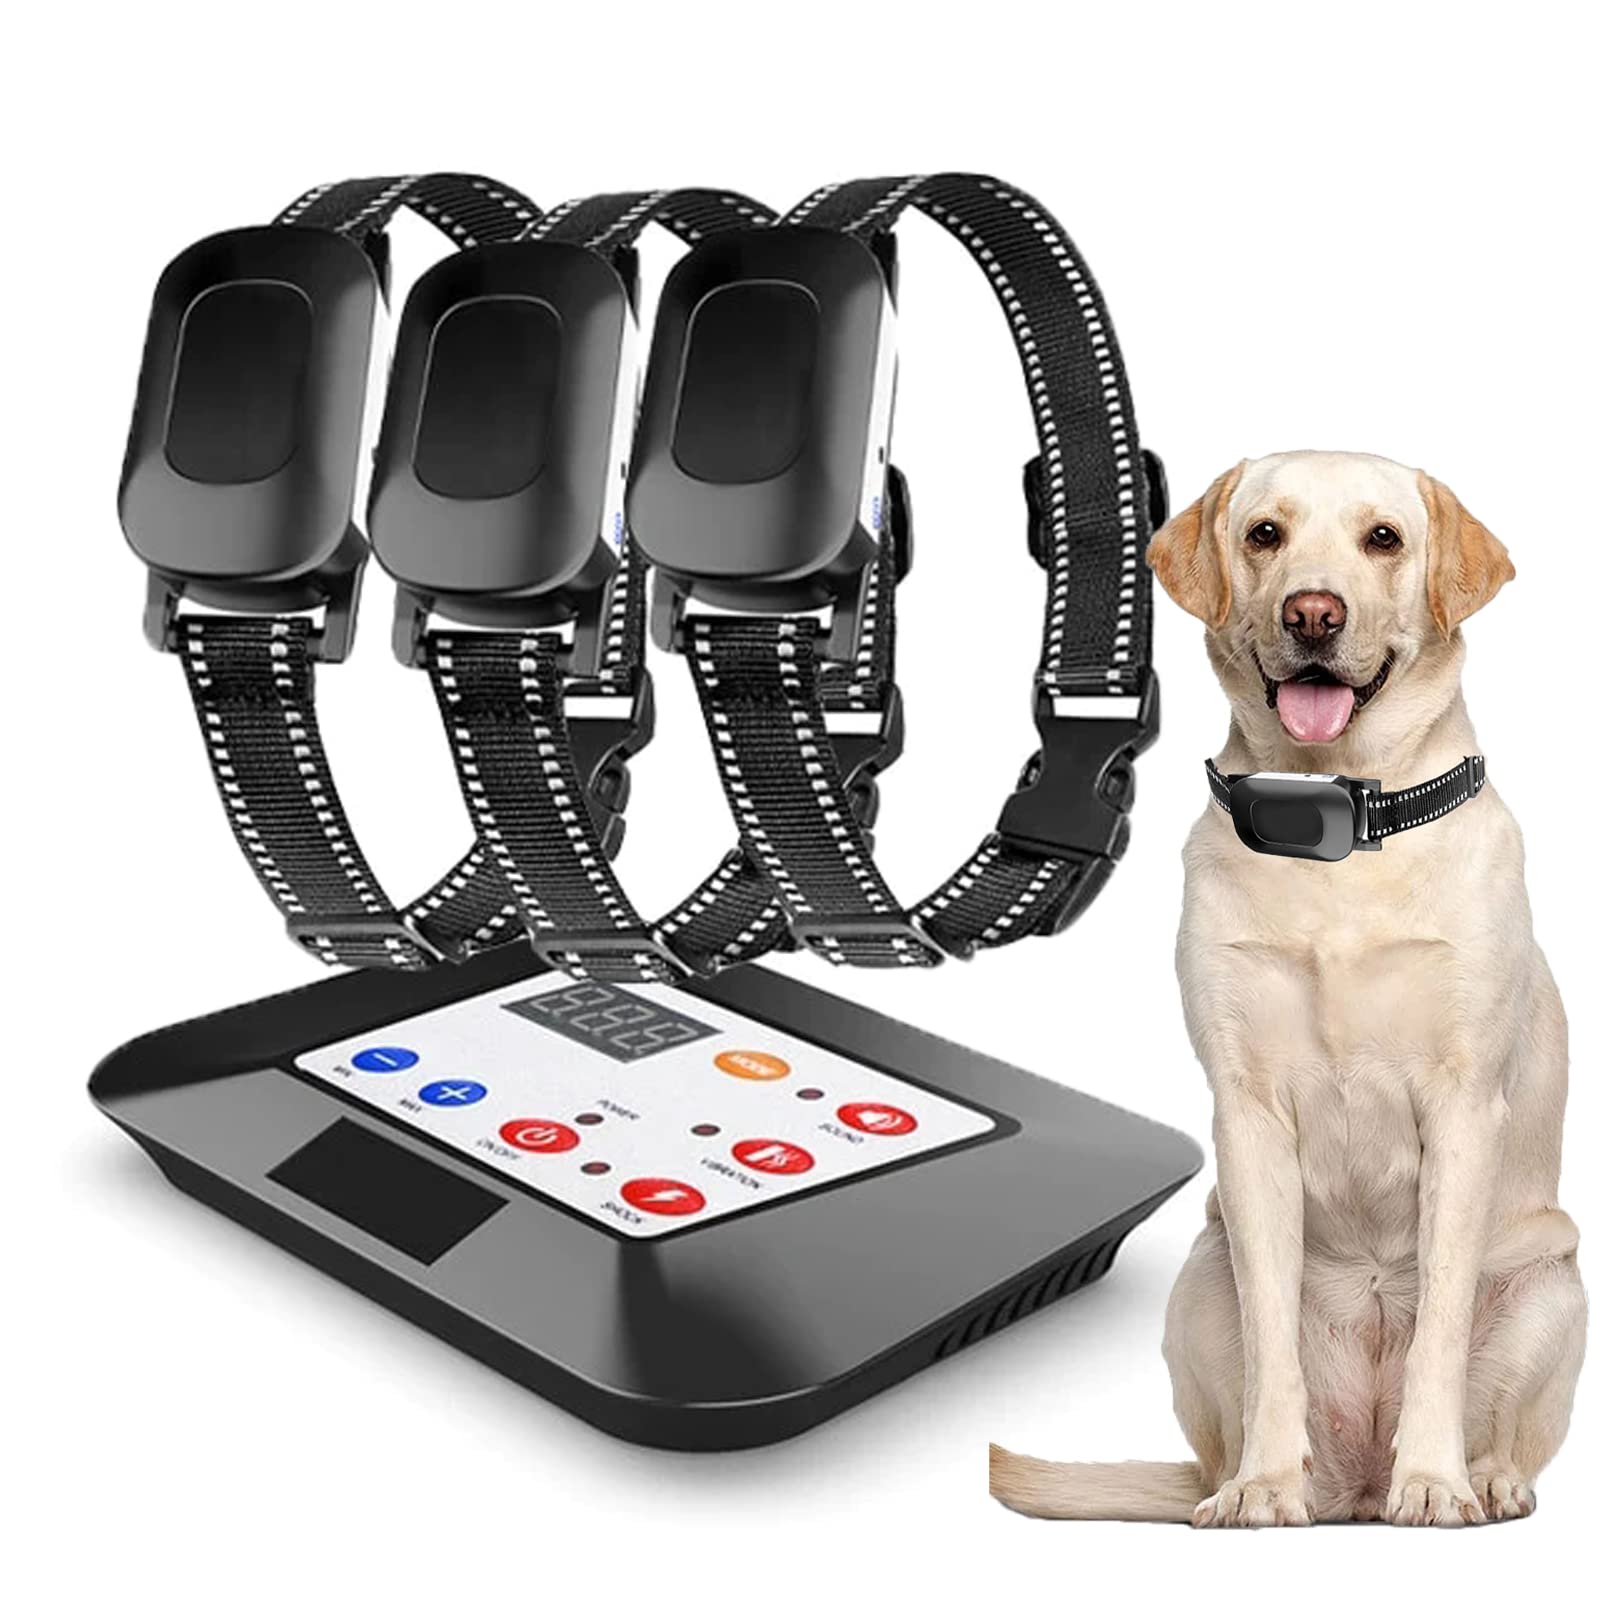 HEXIEDEN Wireless Dog Fence,Pet Containment System,Electric Dog Training Collar with Remote Dog Boundary System,Reflective Stripe,Waterproof,Adjustable Range,Harmless,for 1 2 3 Dogs,for3dogs